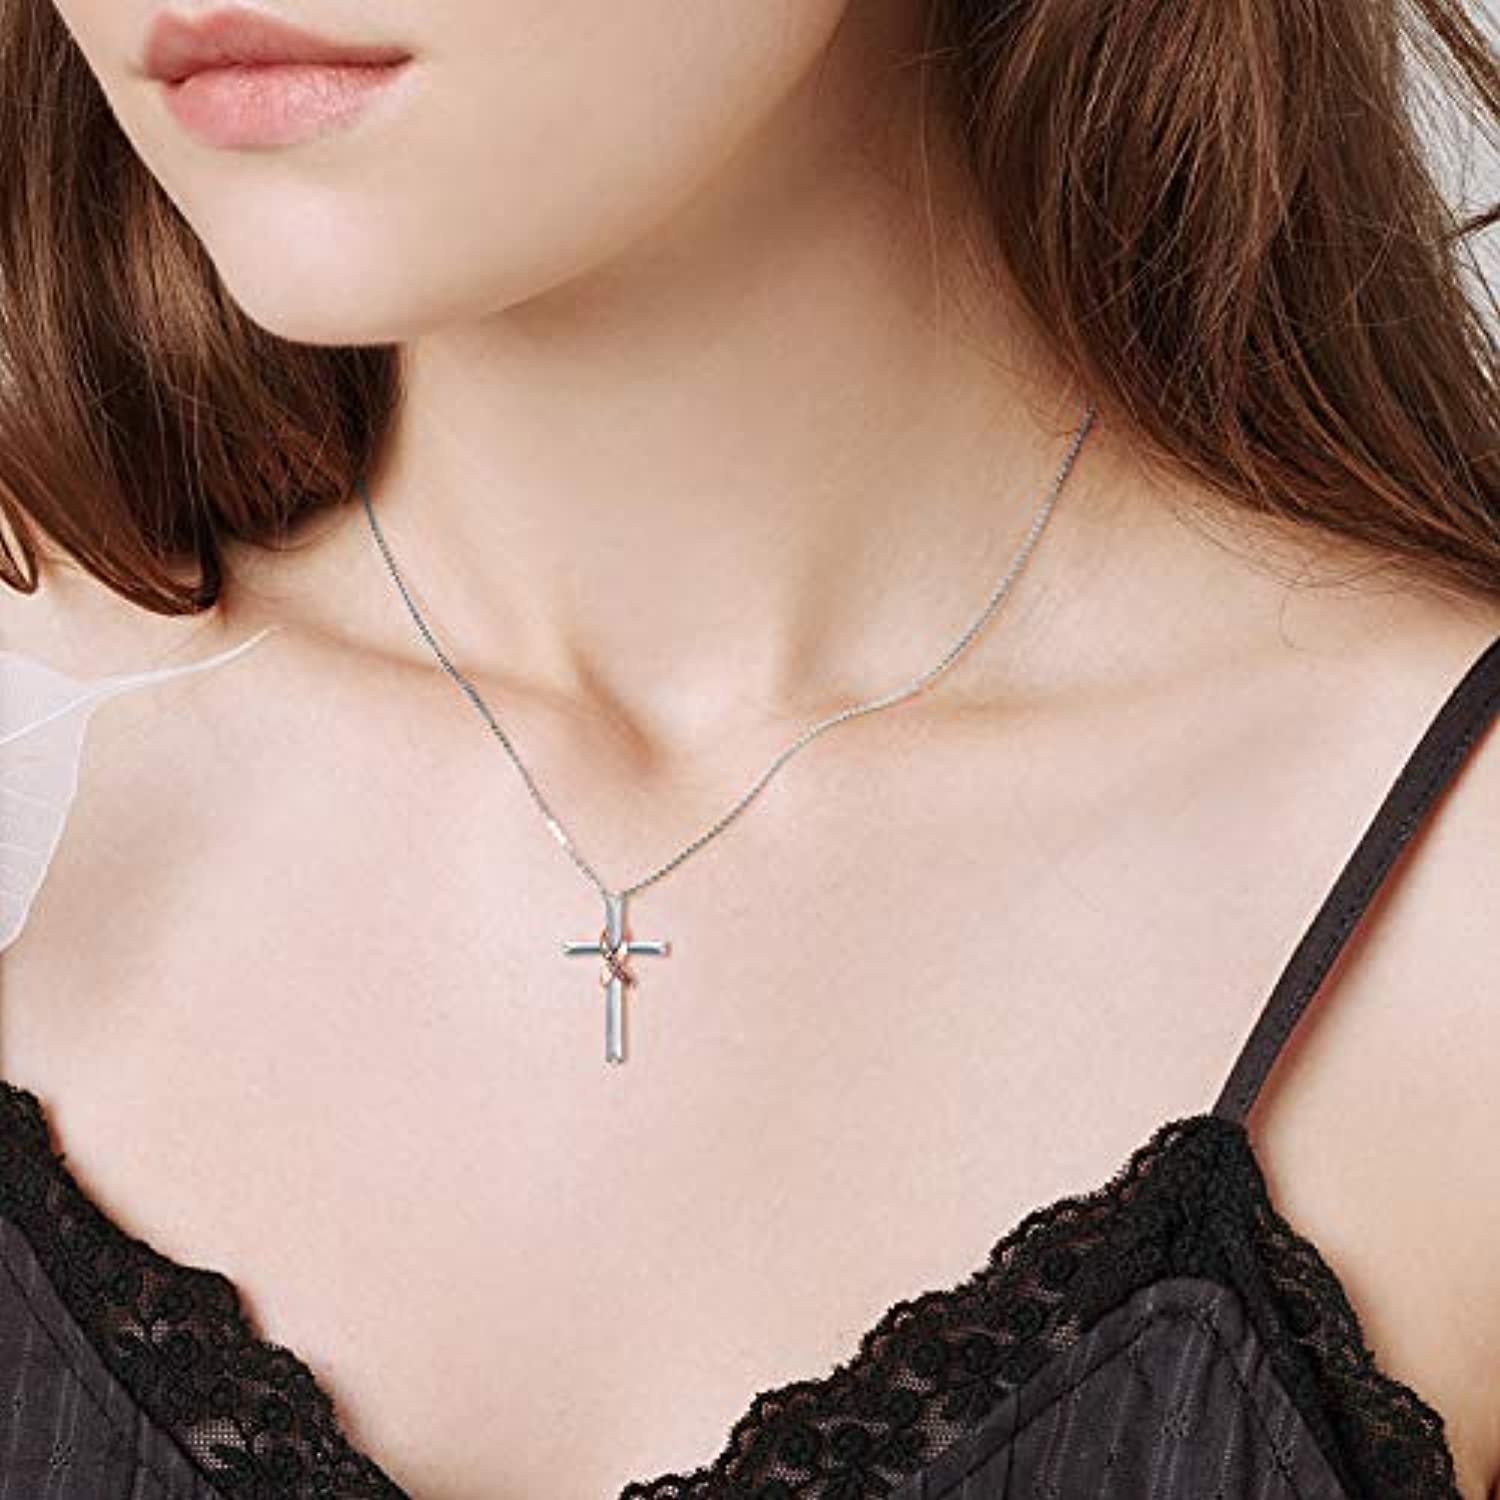 Hope Pink Ribbon Necklace Women - S925 Sterling Silver Cross Wing Jewelry  for Girl Strength Gift Awareness of Breast Cancer Christian (Pink)